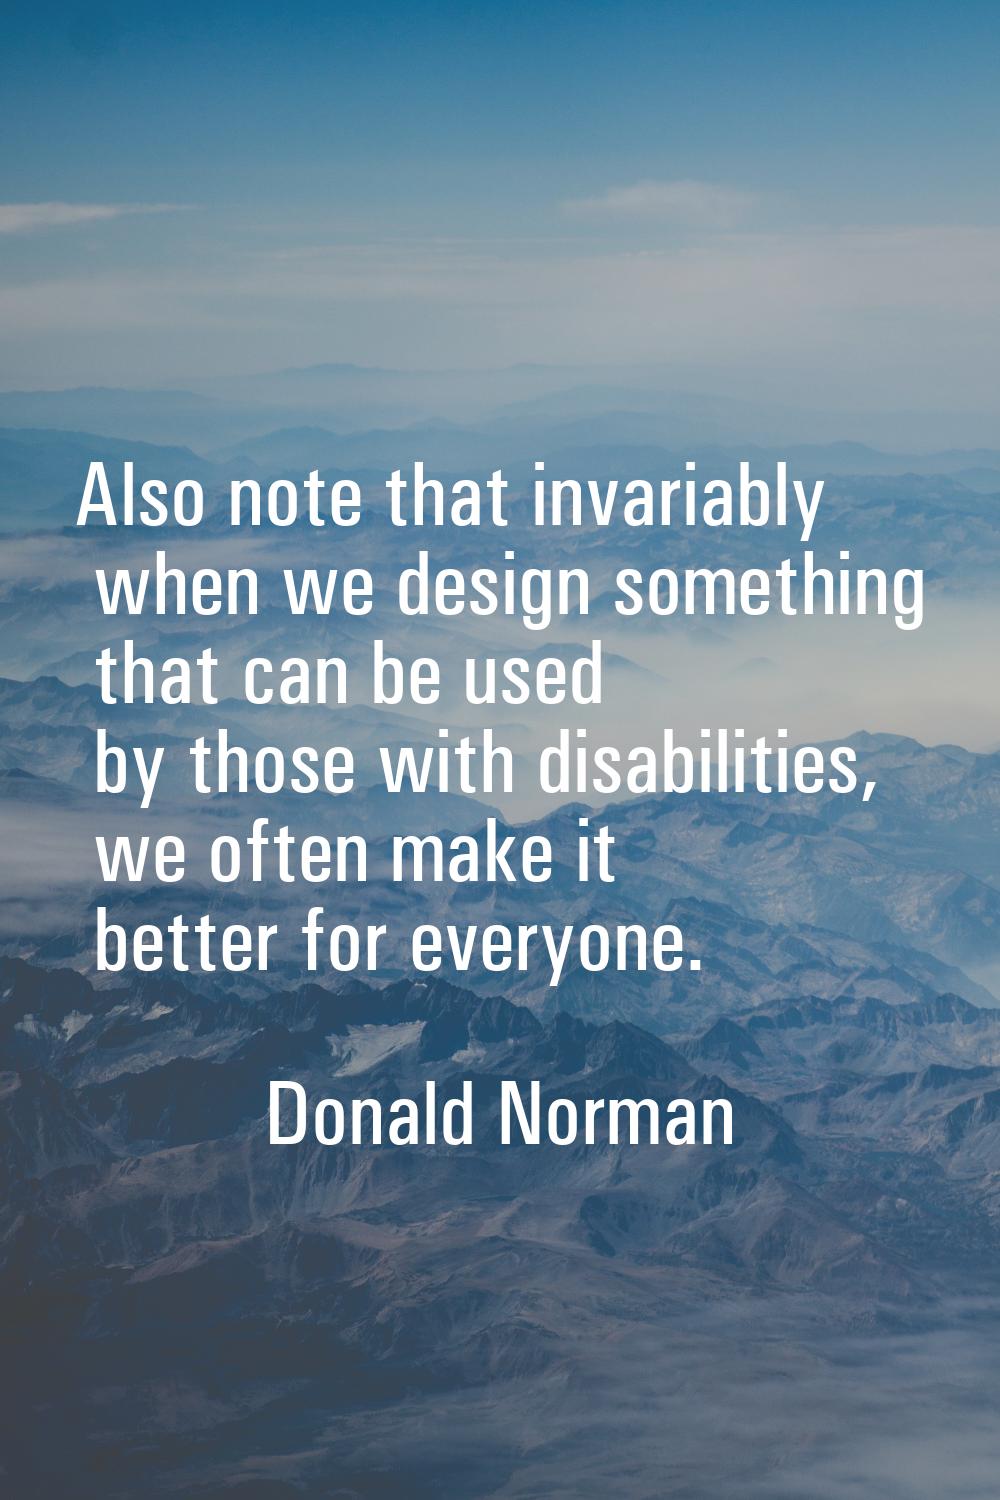 Also note that invariably when we design something that can be used by those with disabilities, we 